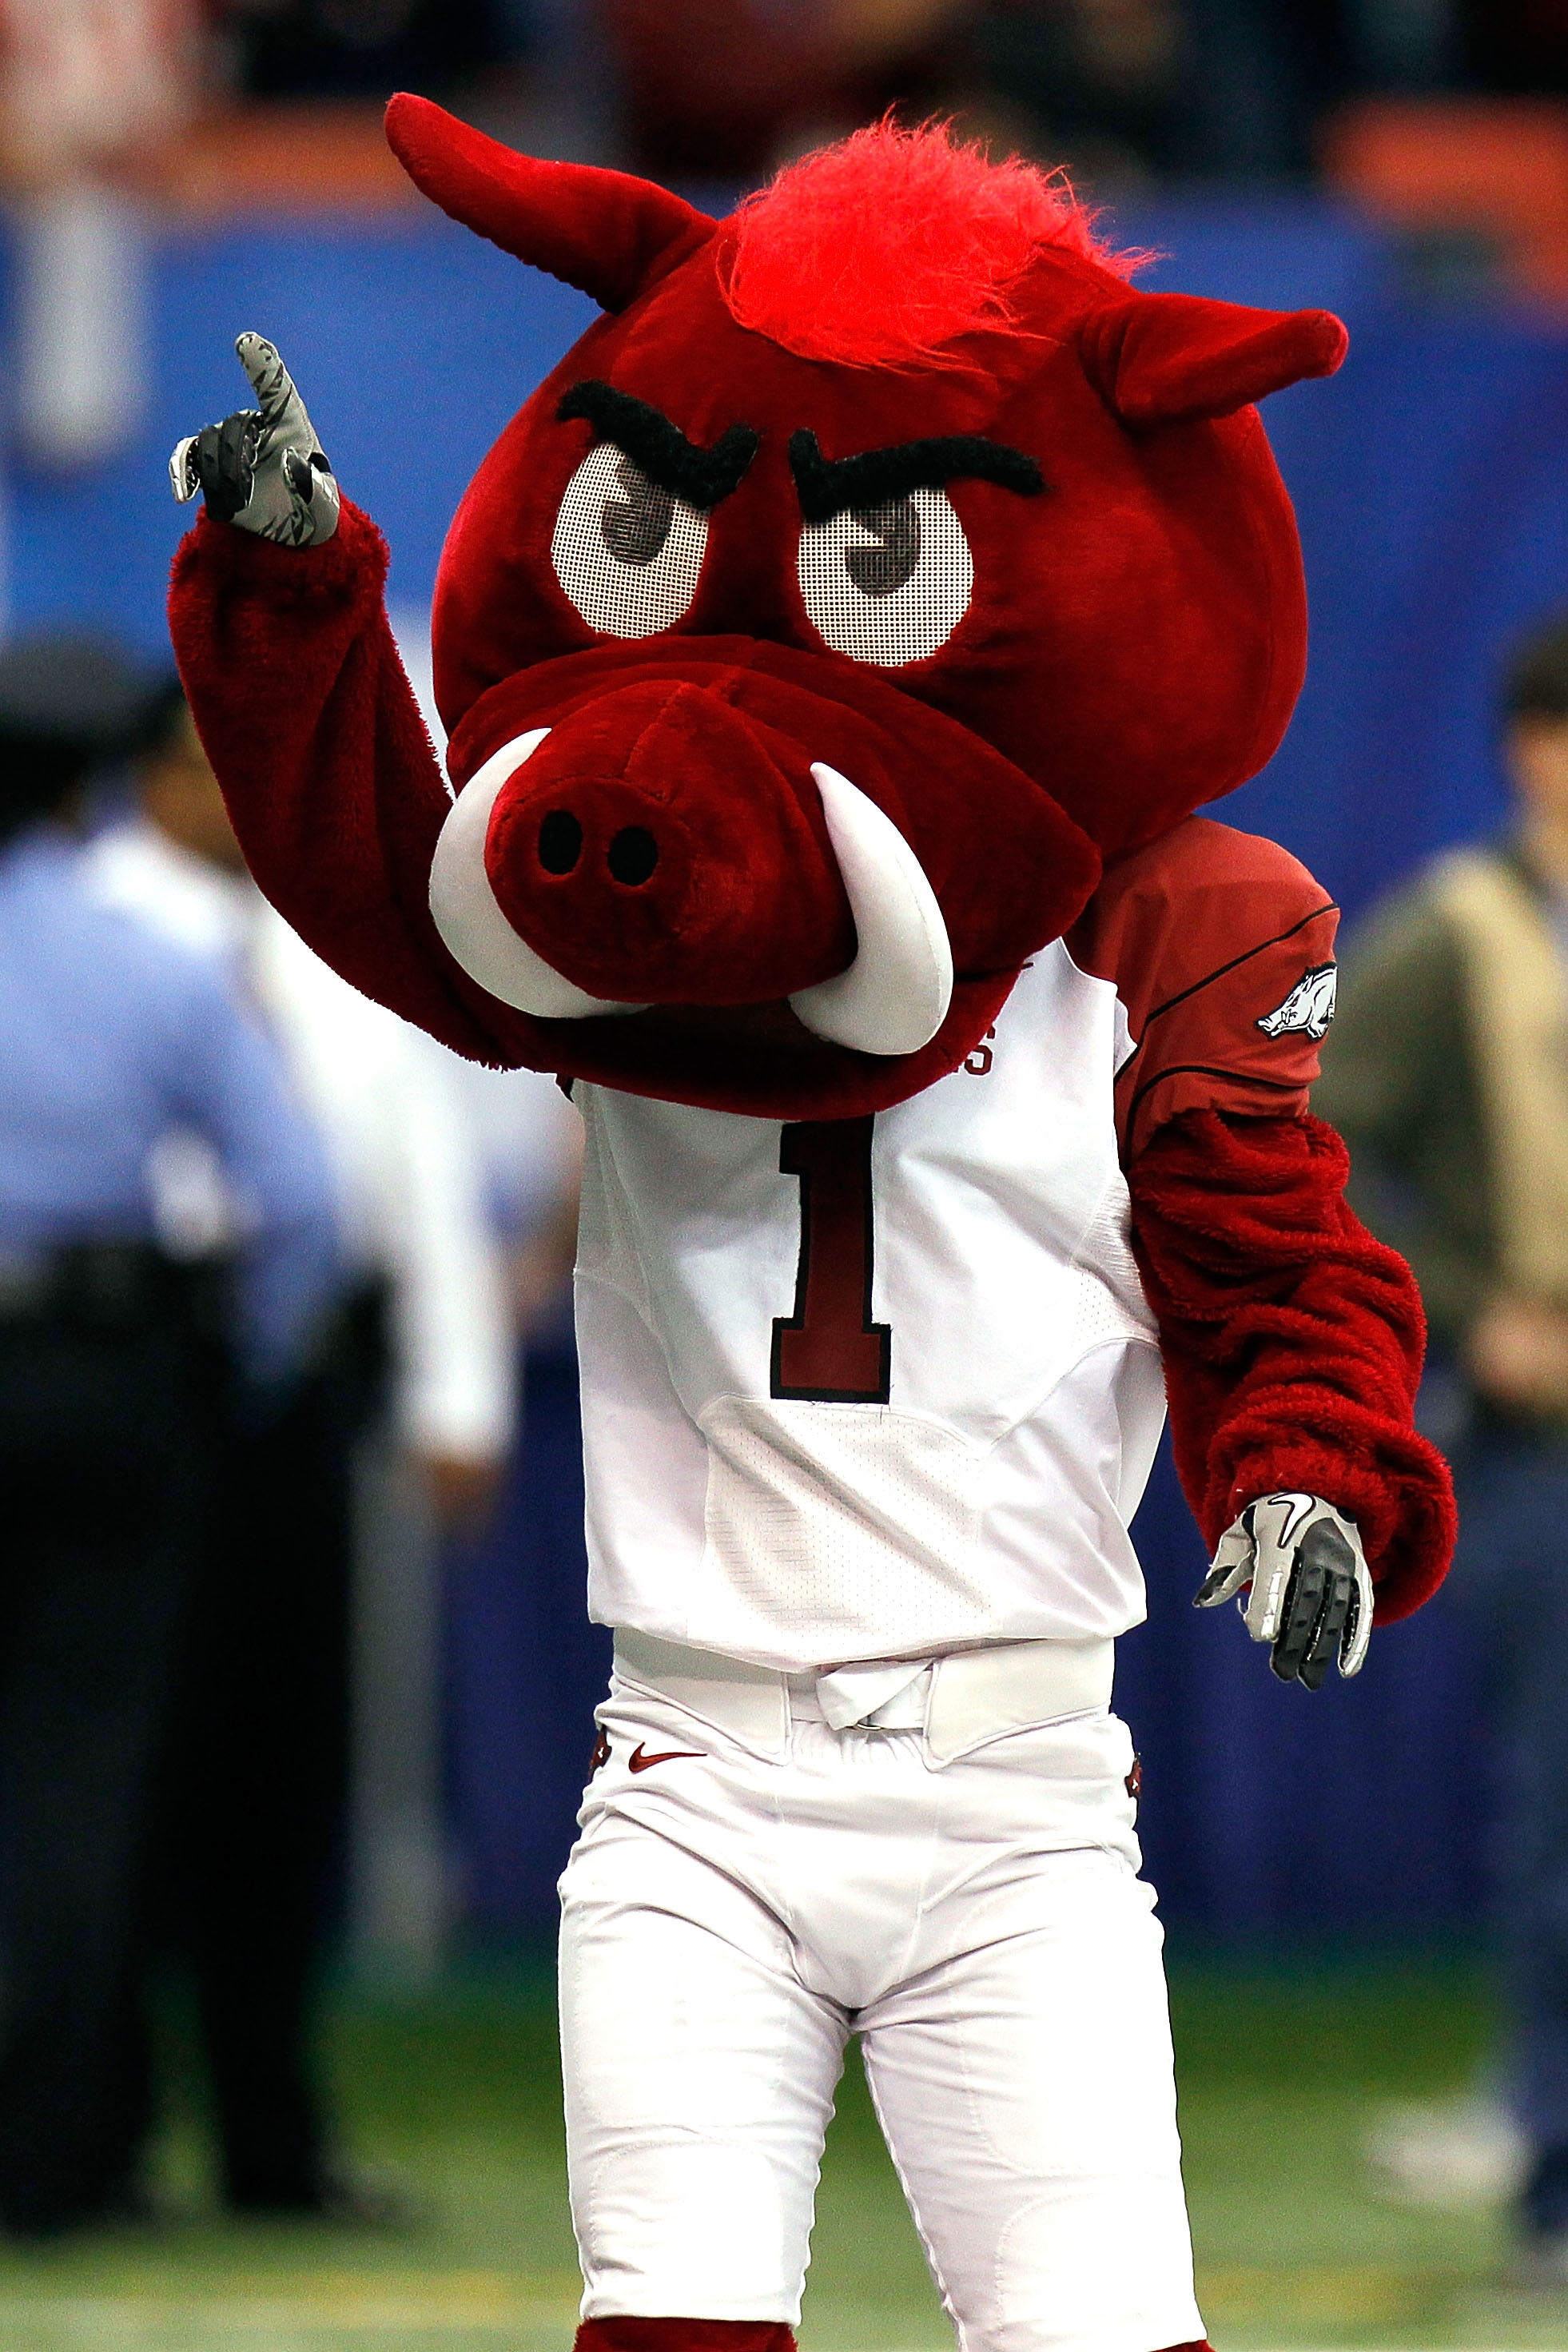 NEW ORLEANS, LA - JANUARY 04:  The Arkansas Razorbacks mascot points during the Allstate Sugar Bowl against the Ohio State Buckeyes at the Louisiana Superdome on January 4, 2011 in New Orleans, Louisiana.  (Photo by Kevin C. Cox/Getty Images)